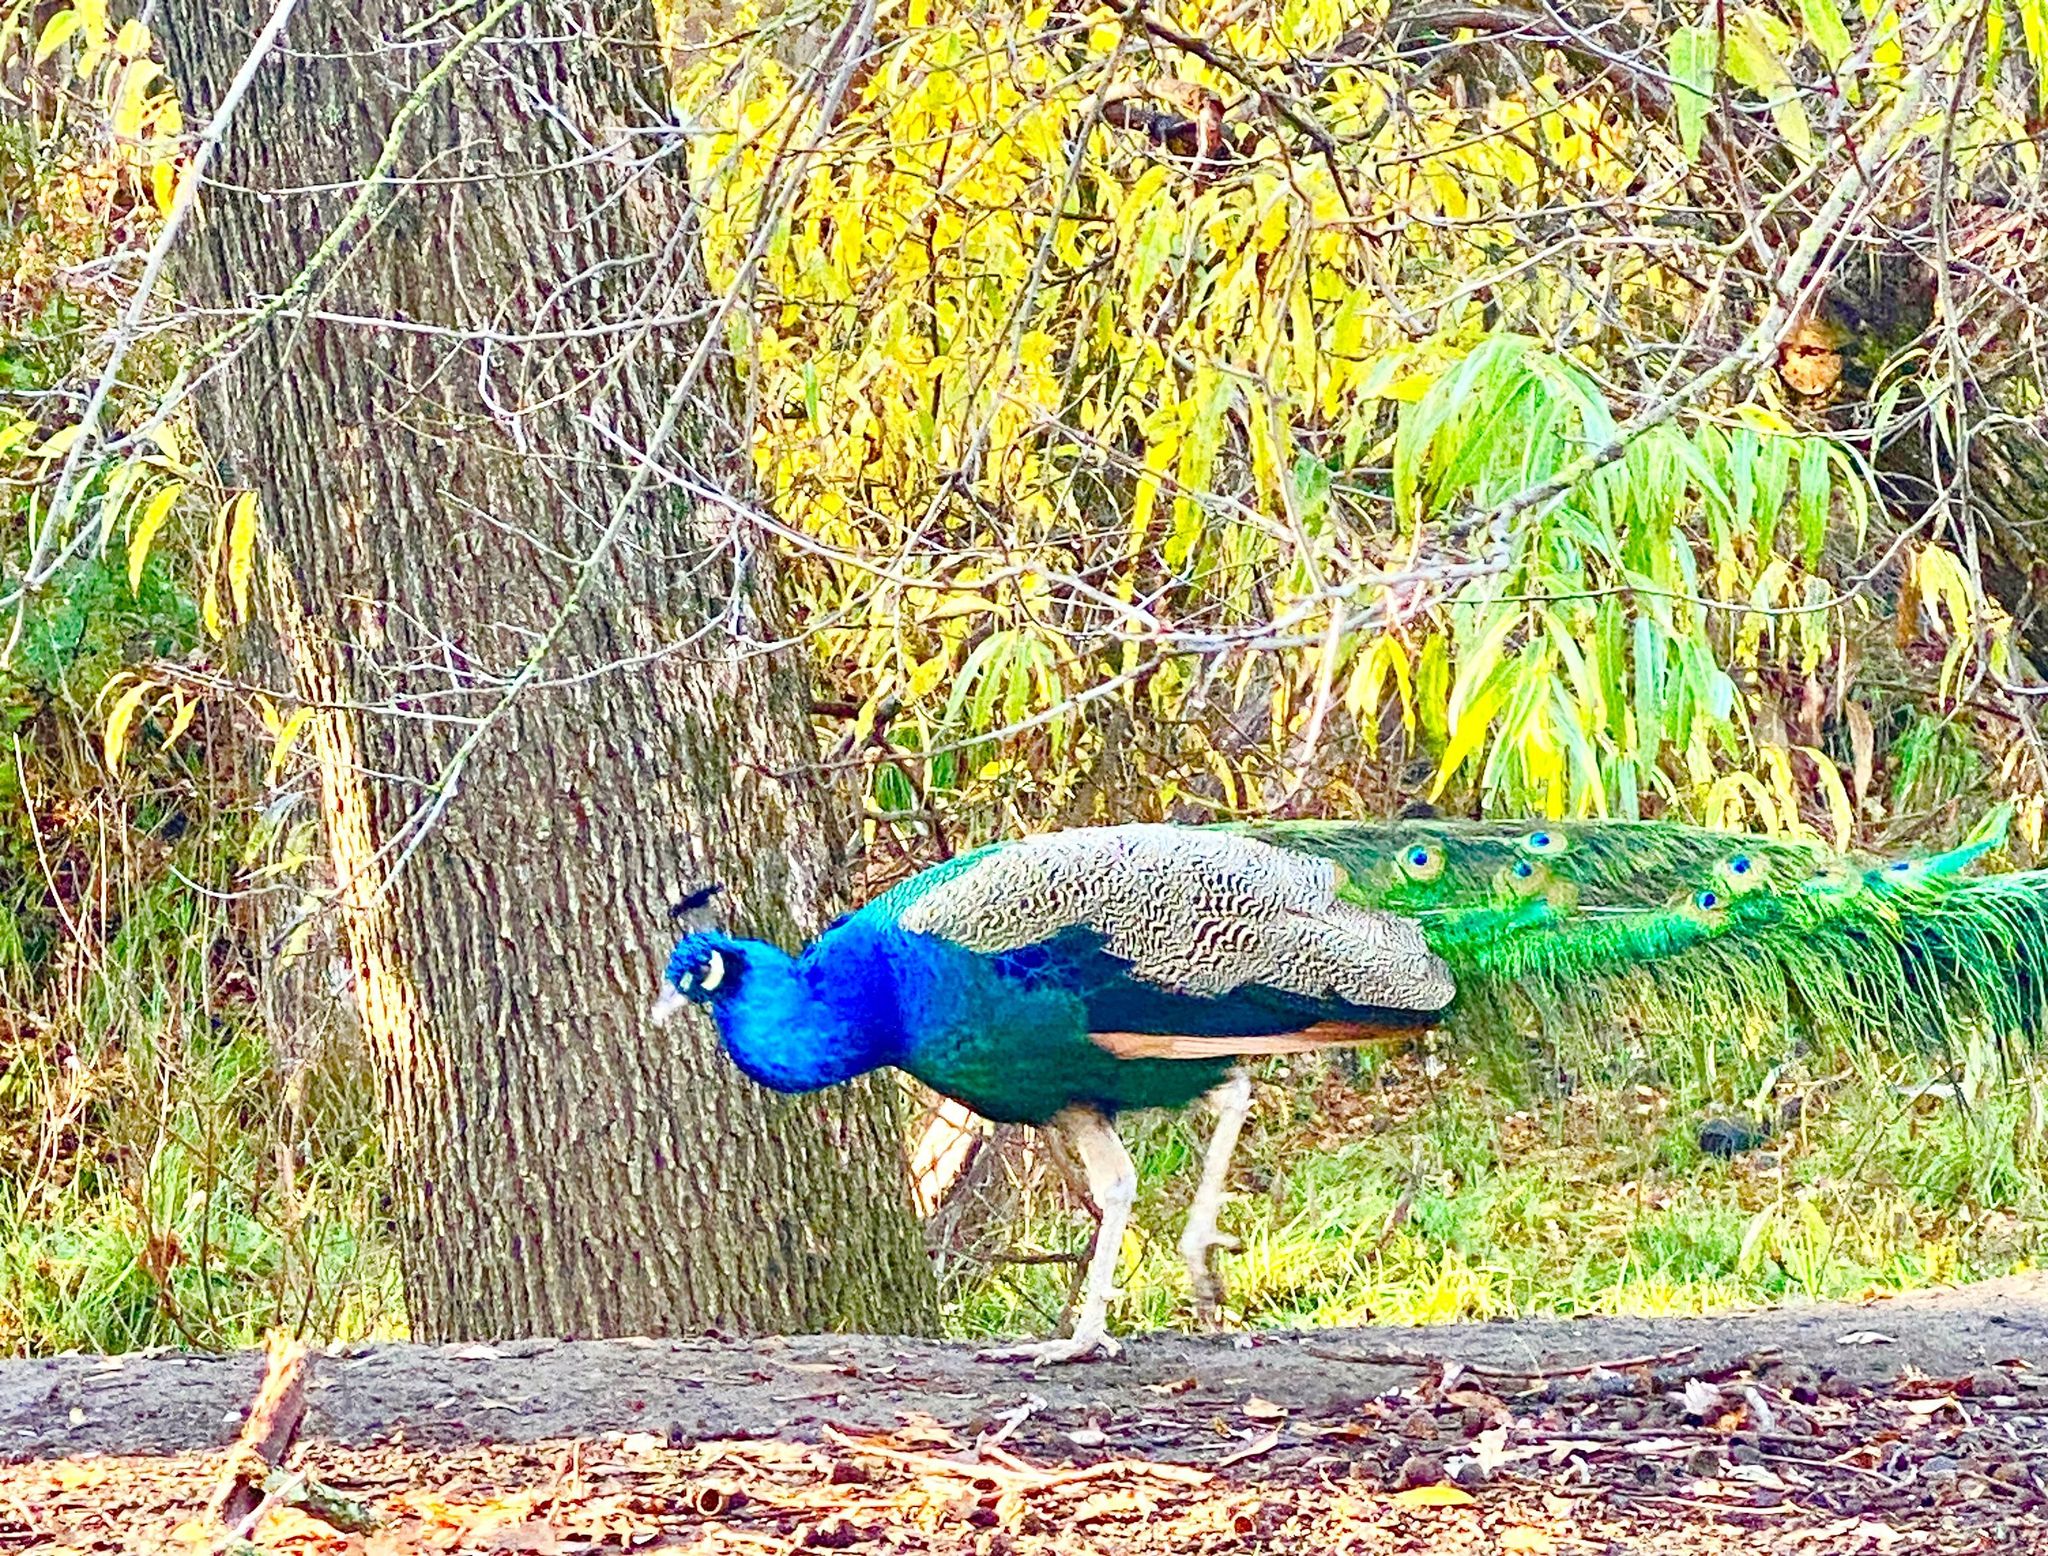 Peafowl from Dunnell Nature Center in Fairfield, CA